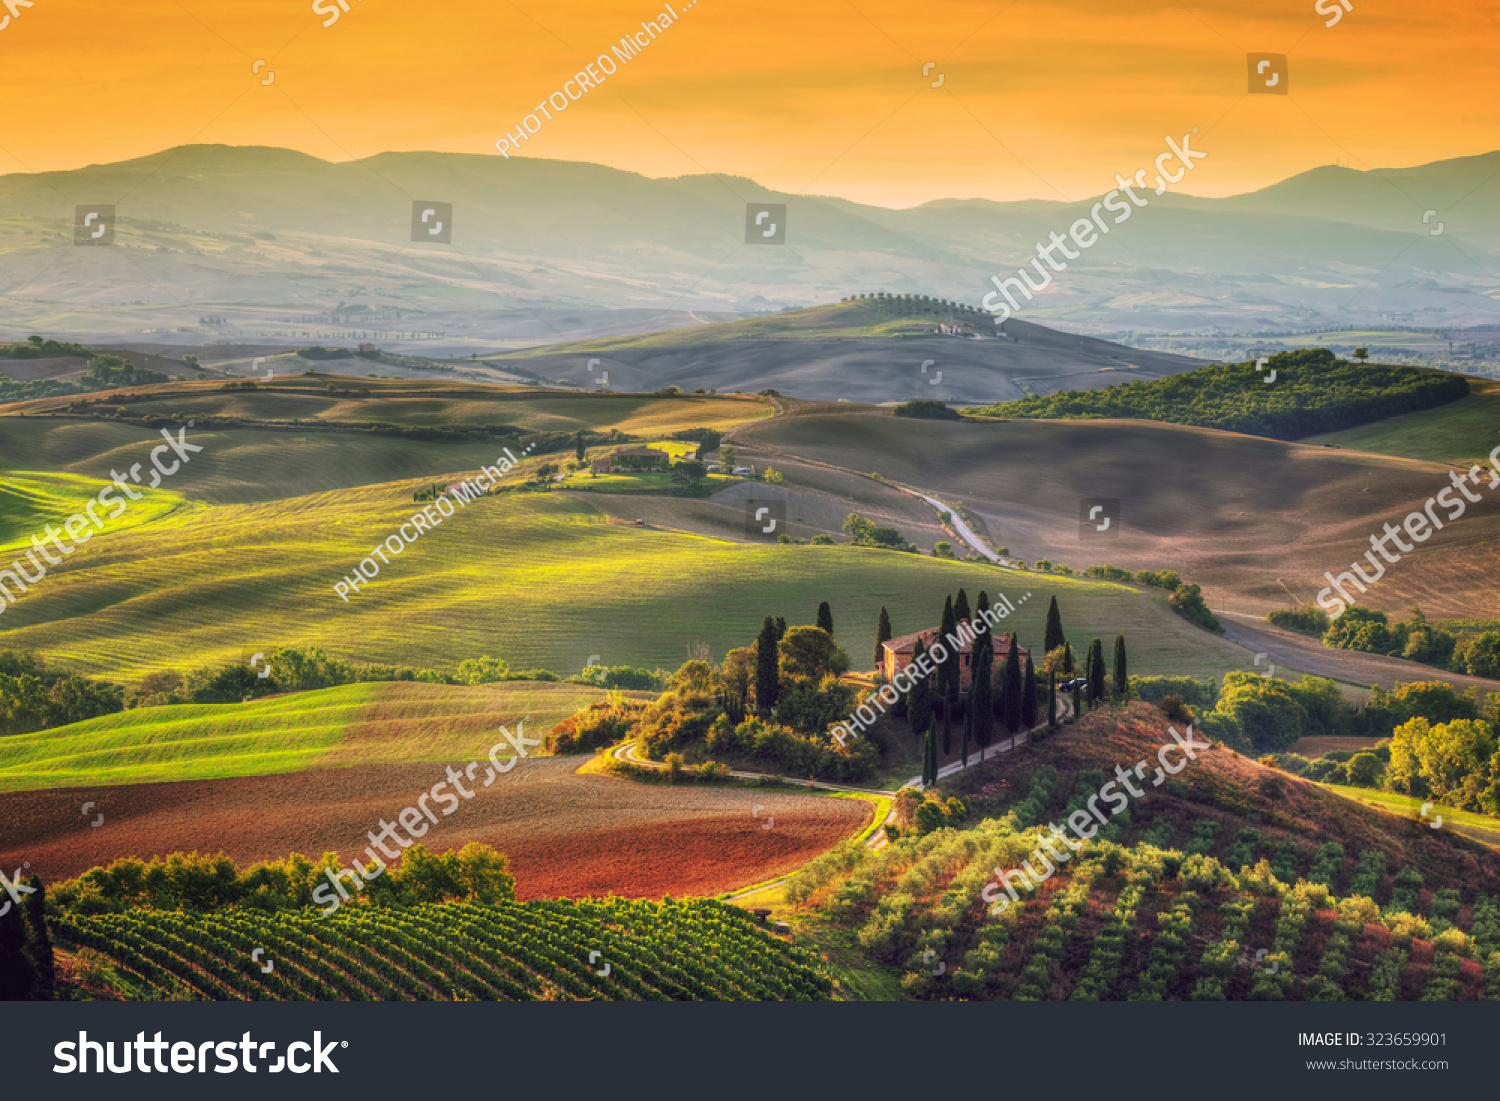 Tuscany landscape at sunrise. Typical for the region tuscan farm house, hills, vineyard. Italy #323659901